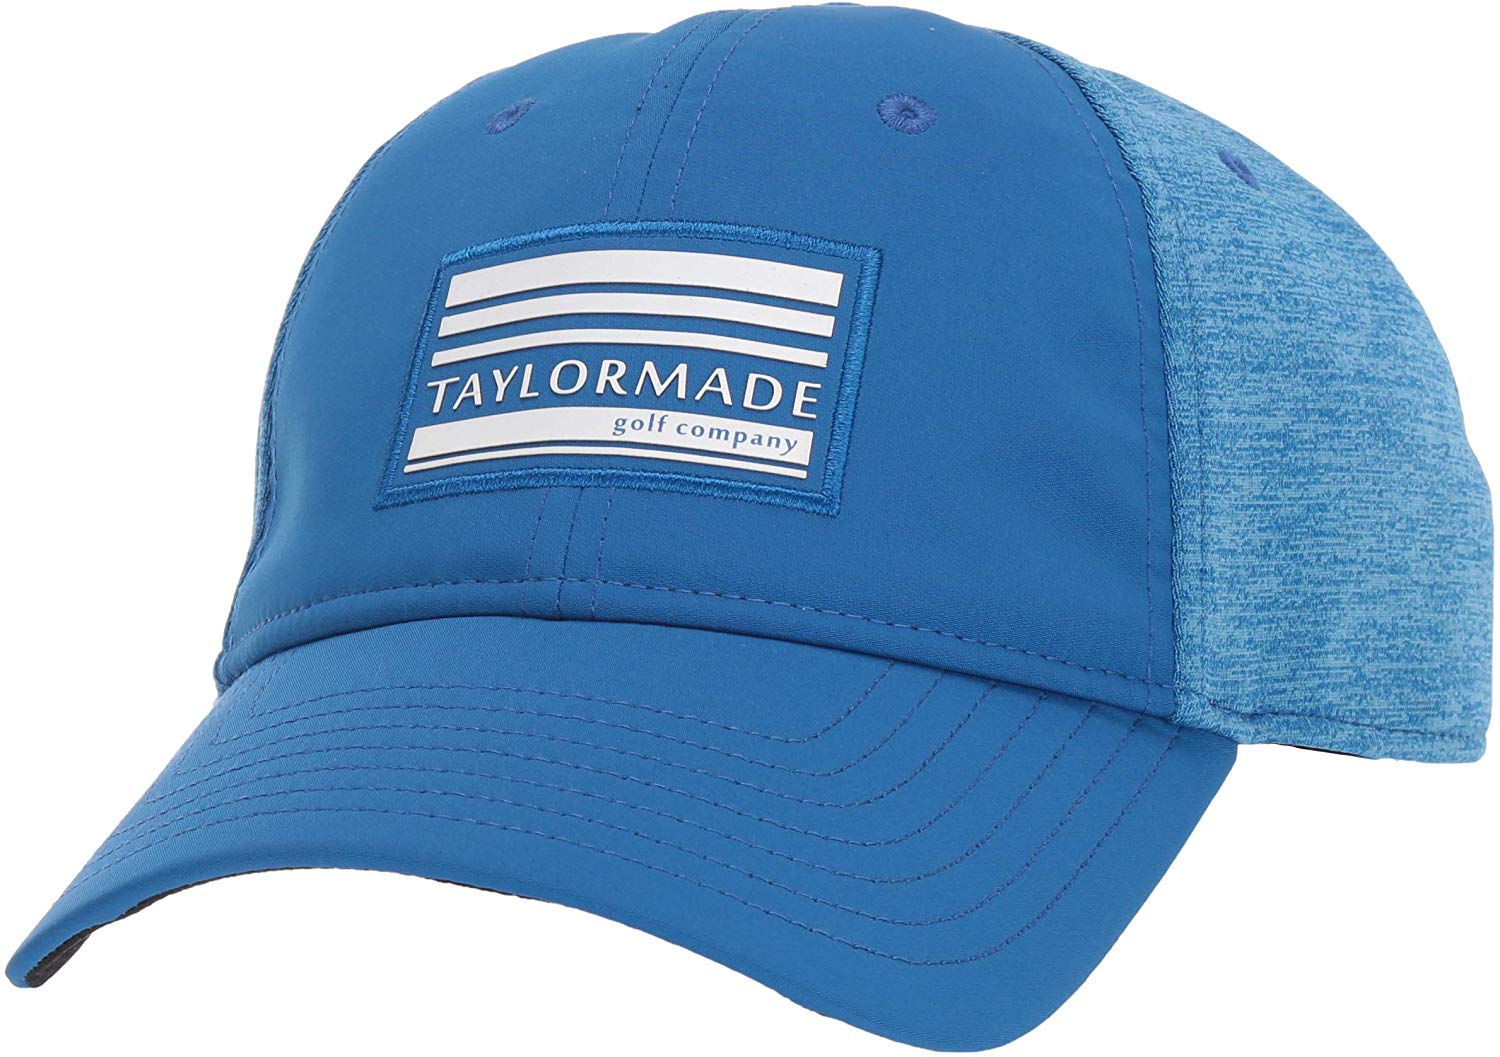 Mens Taylormade 2019 Performance Lite Lifestyle Golf Hats